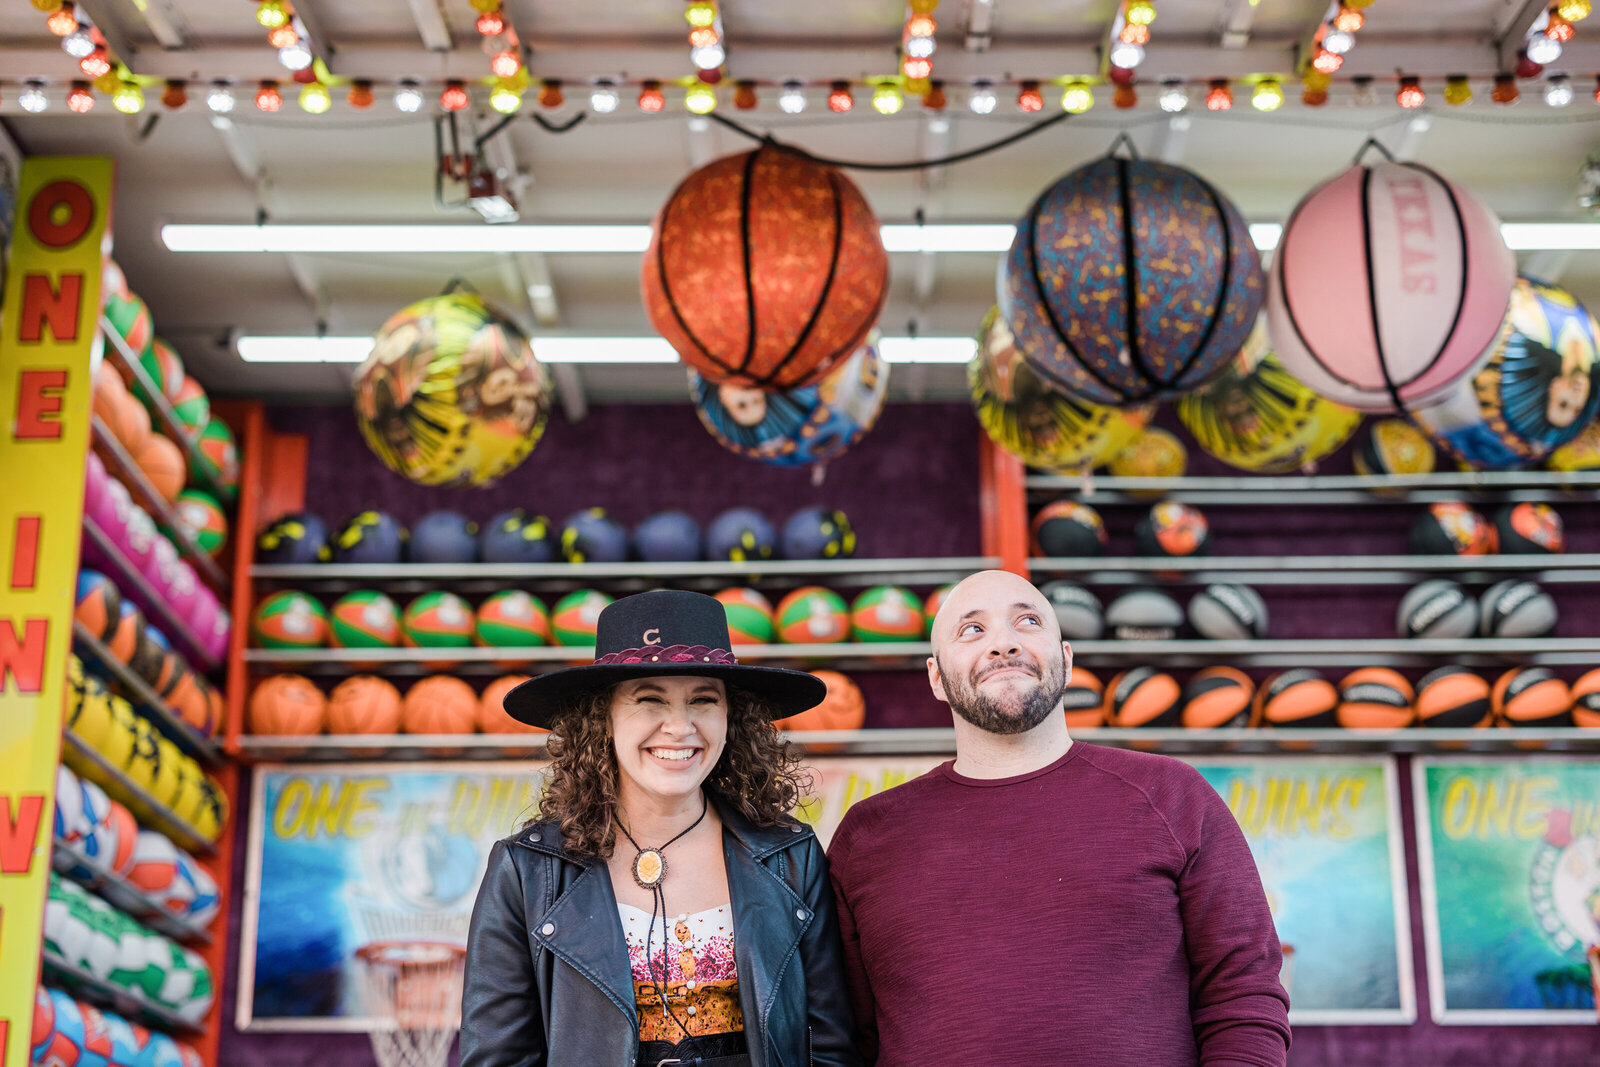 A couple playfully posing in front of a midway game during their carnival engagement session in Fort Worth, Texas. The woman on the left is wearing a black, brimmed hat, colorful dress, and a black leather jacket while smiling and looking directly at the camera. The man on the right is wearing a maroon sweater and is smiling coyly while looking off to the right with only his eyes.